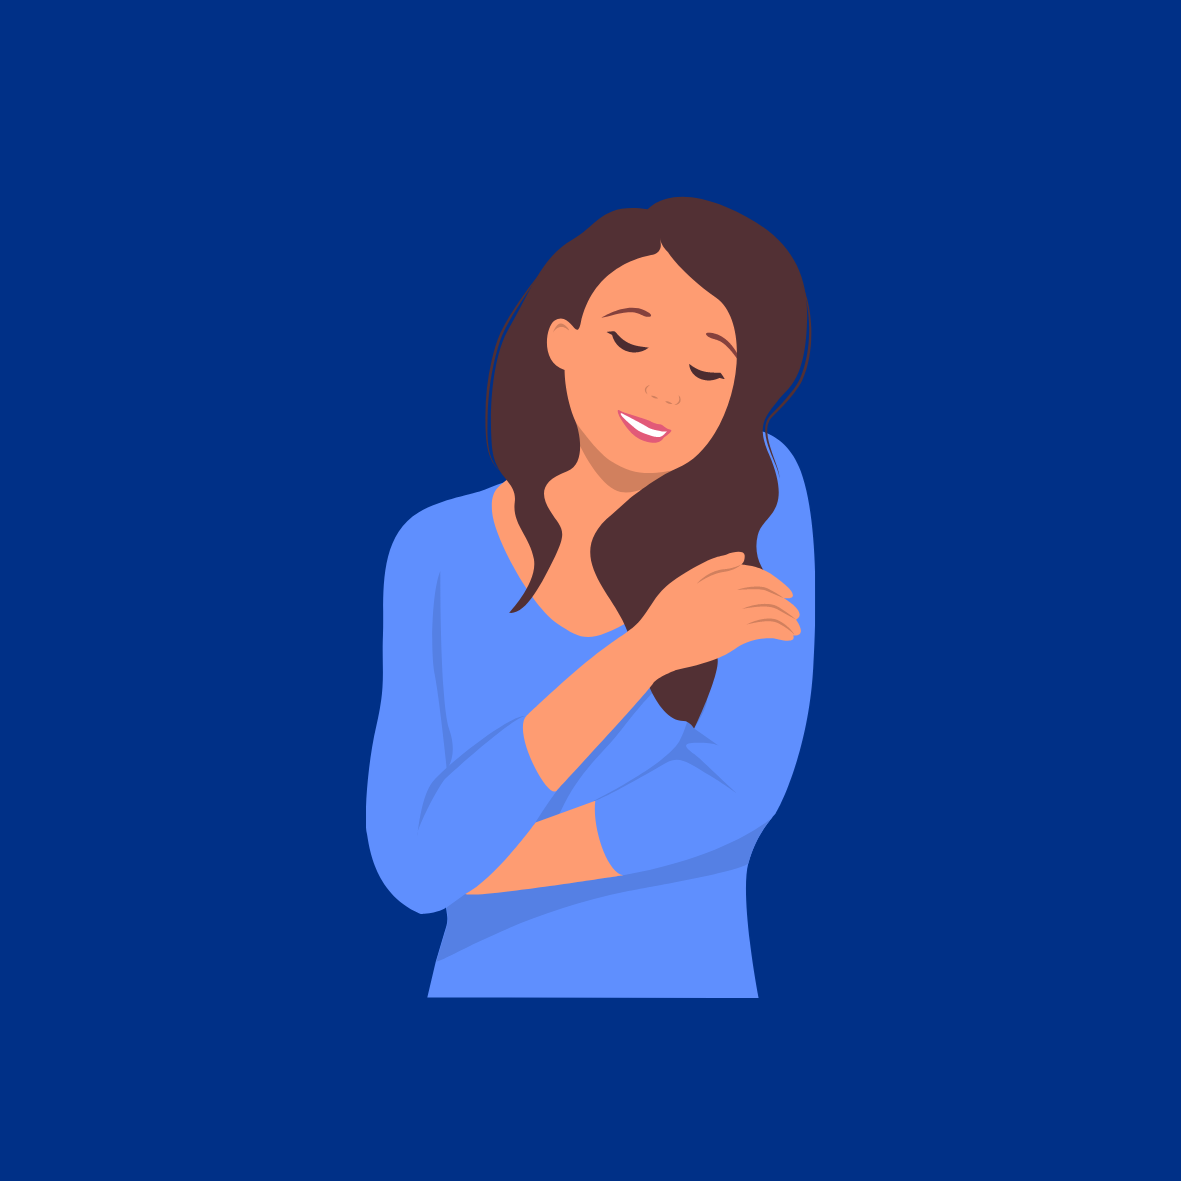 Image of Person Looking After Themselves and Giving Themselves a Caring Hug